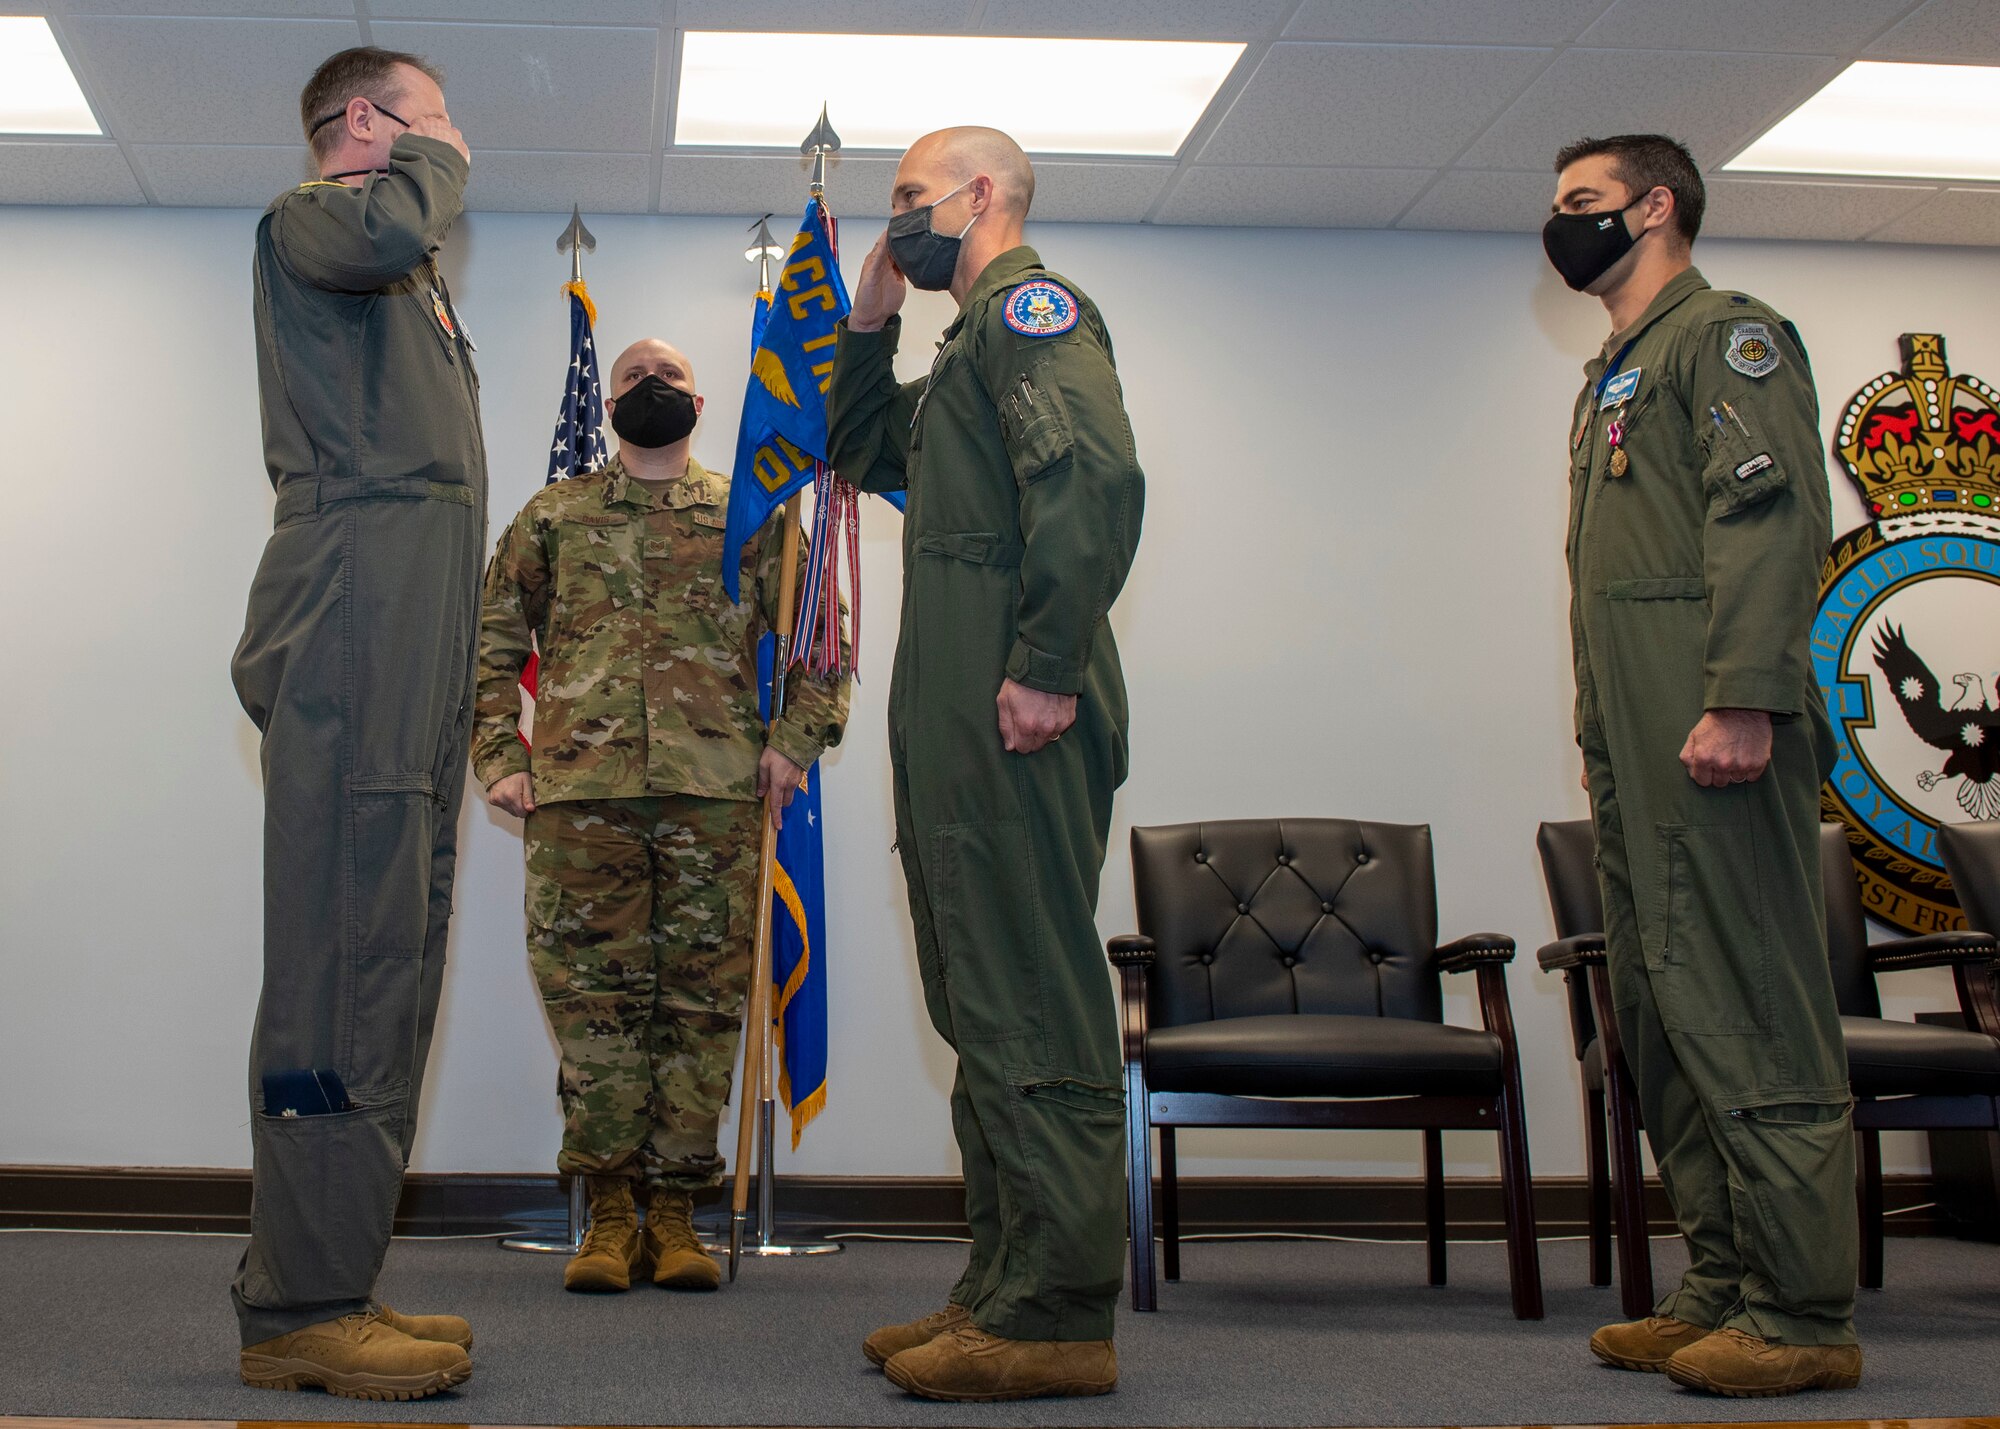 Lt. Col. Tanner Hein, center, incoming Headquarters Training Support Squadron Detachment 15 commander, salutes Lt. Col. Scott Major, left, Air Combat Command Training Support Squadron commander, as he accepts command during the Detachment 15 change of command ceremony at Seymour Johnson Air Force Base, North Carolina, April 9, 2021.